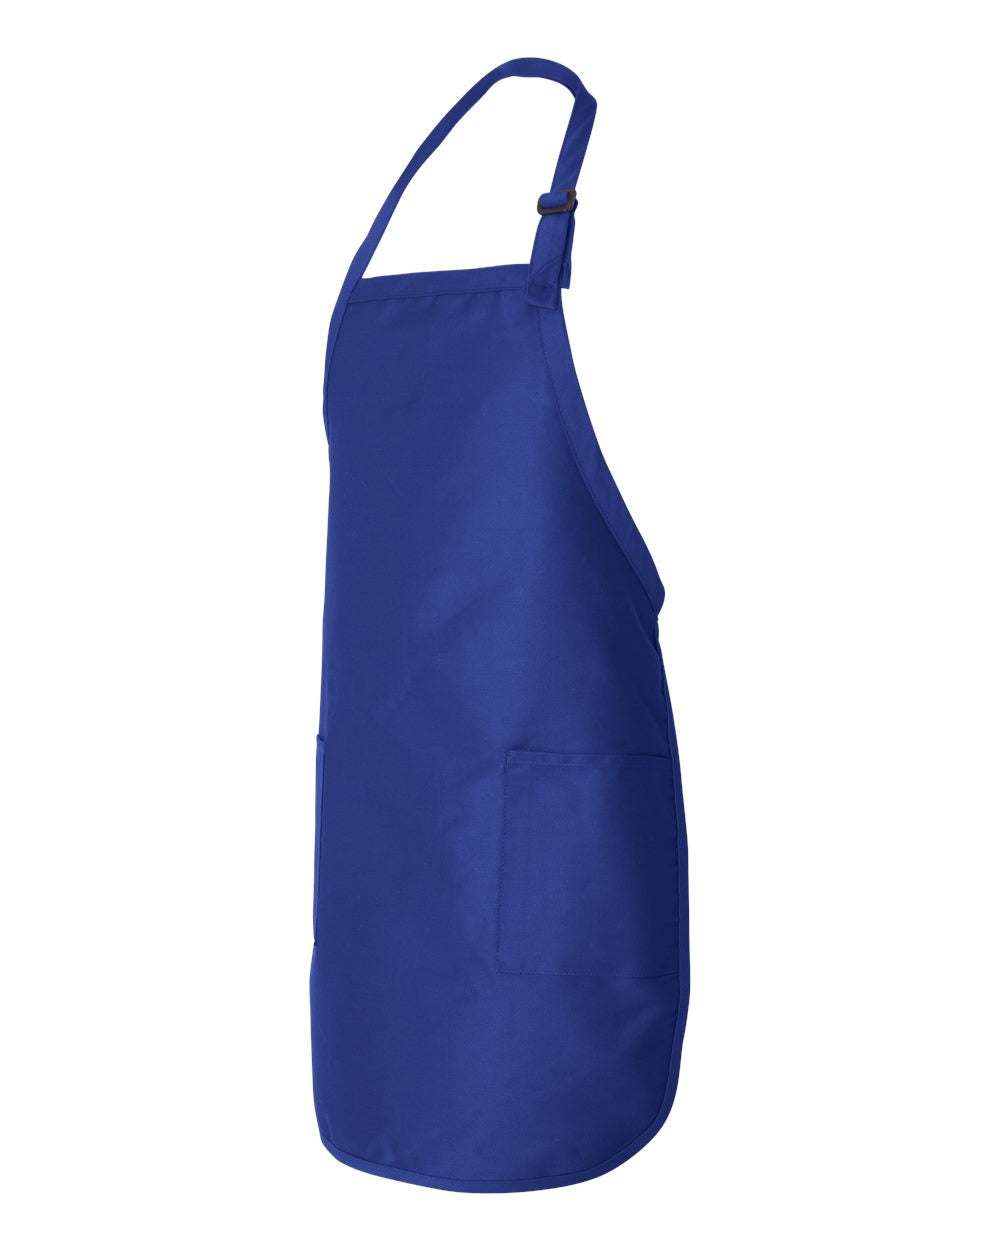 Q-Tees Full-Length Apron with Pockets Q4350 #color_Royal